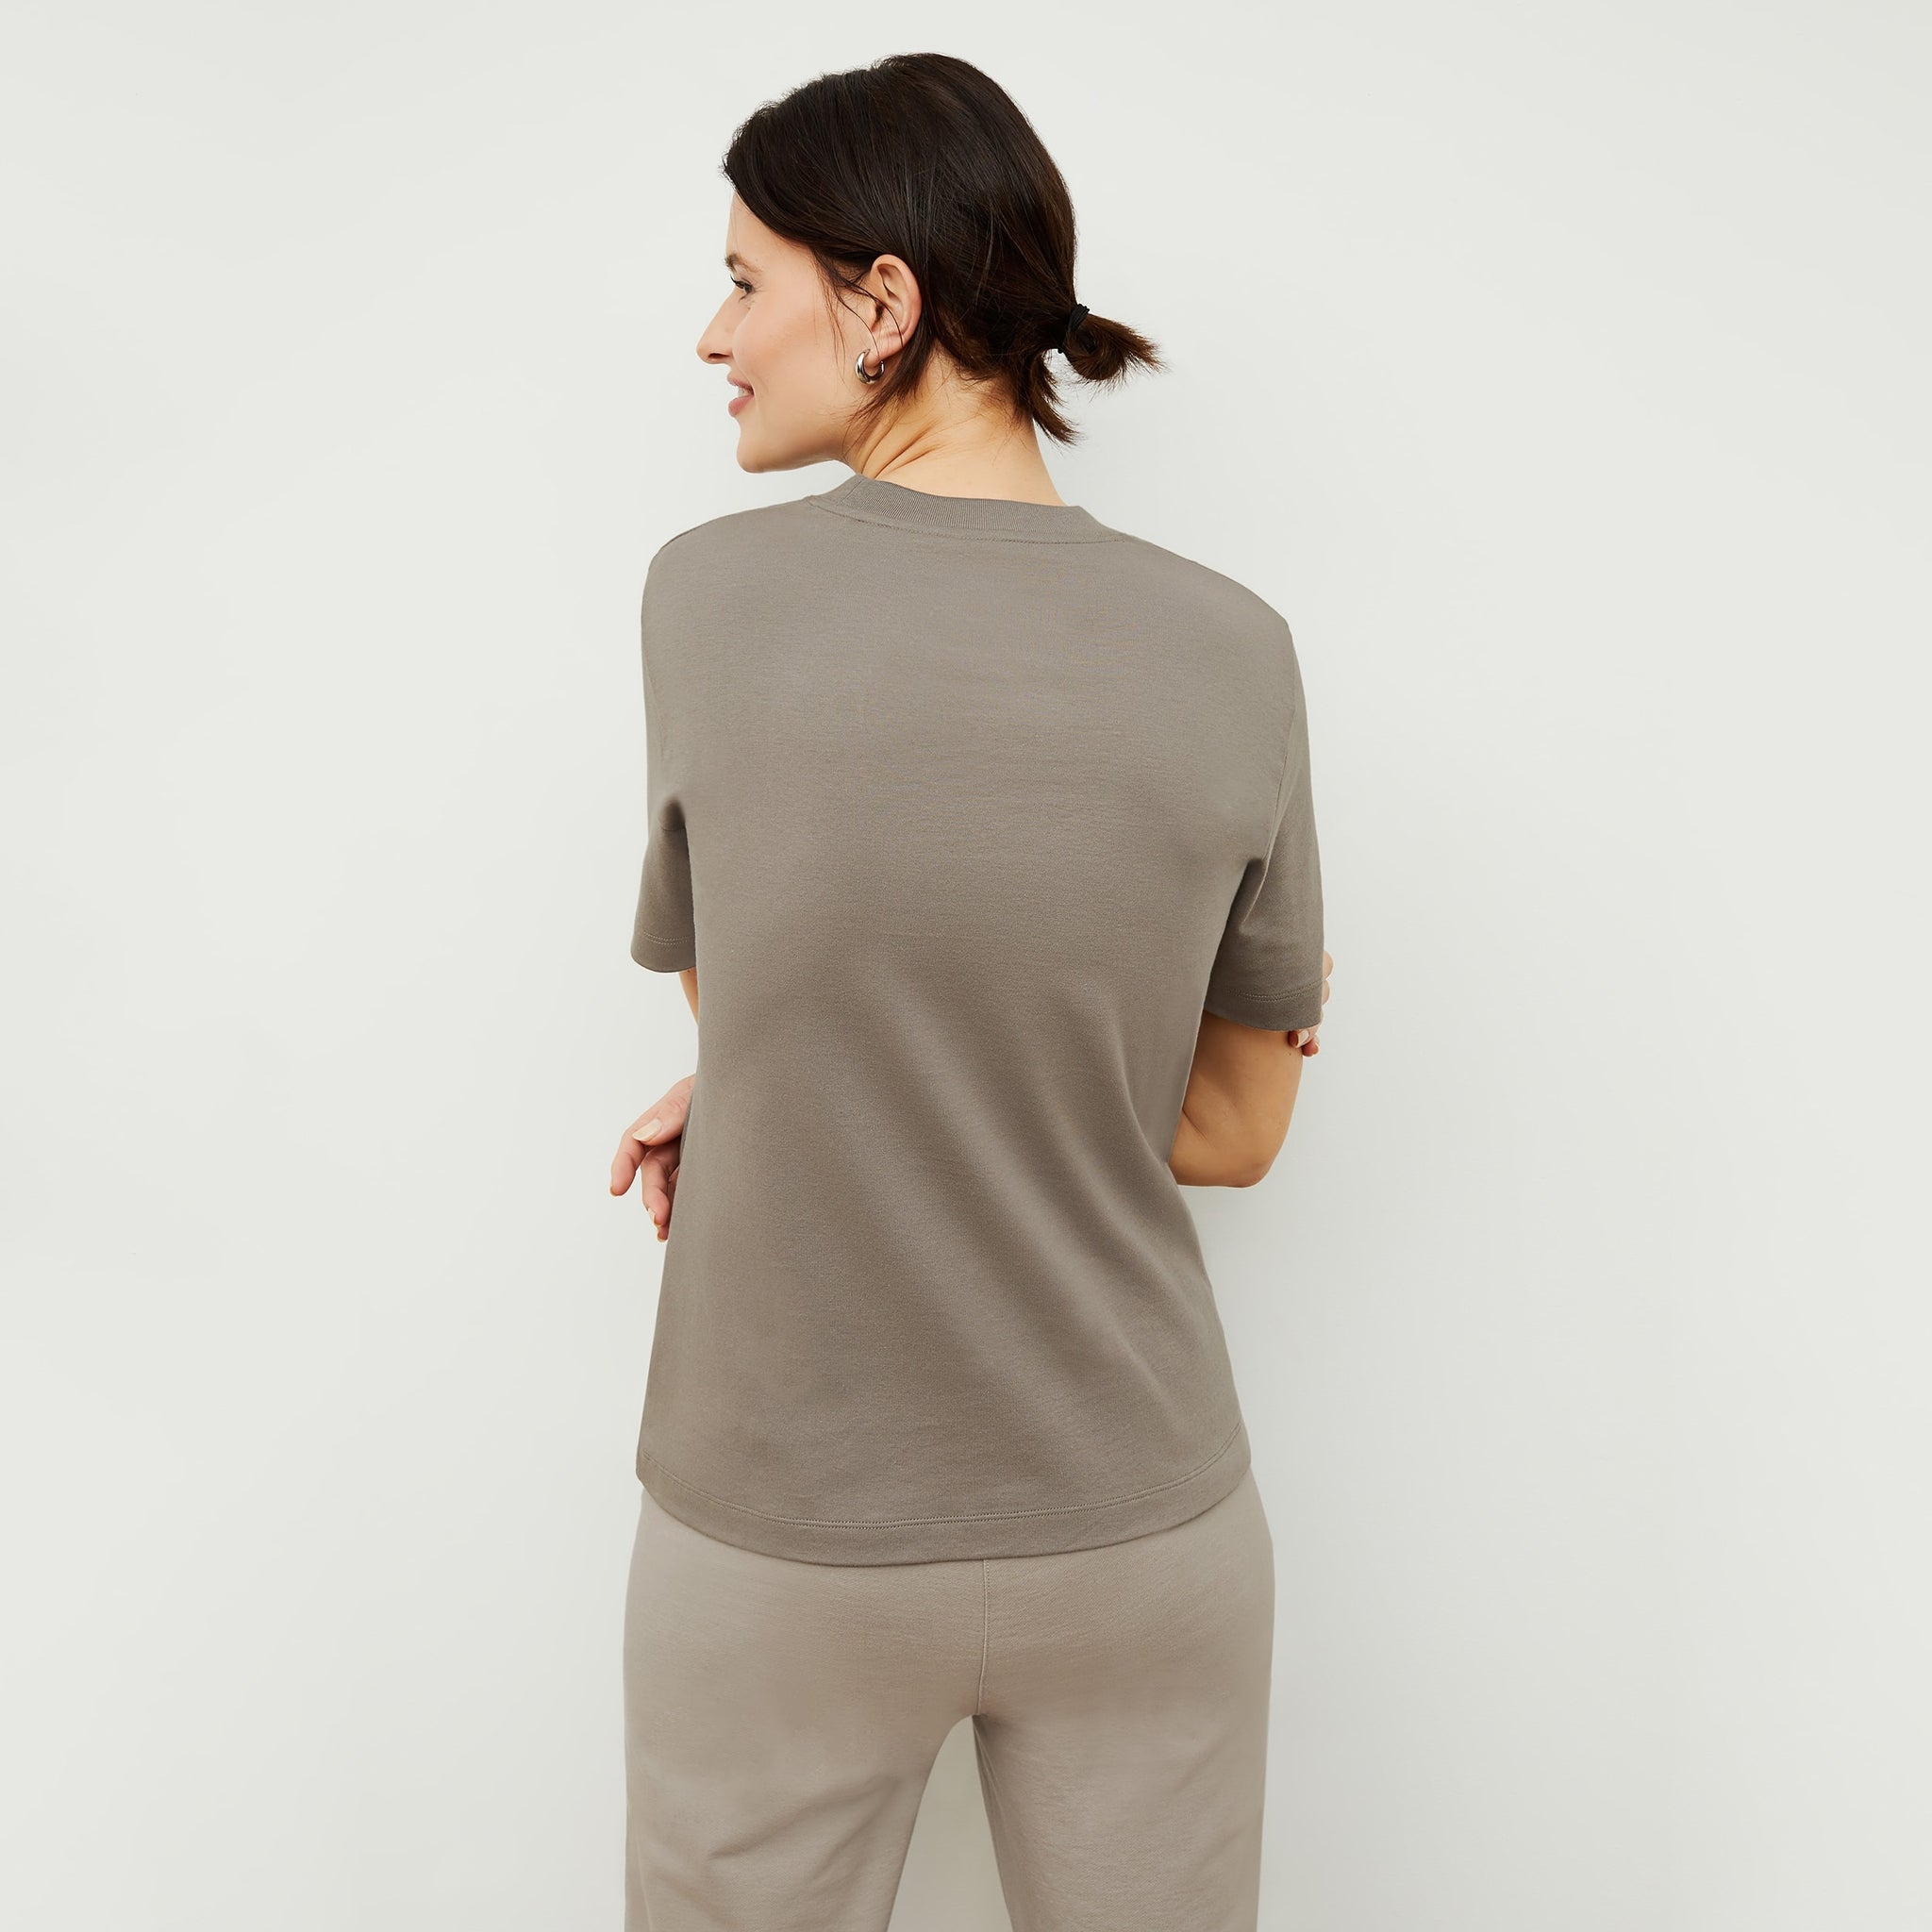 Back image of a woman standing wearing the Leslie T-Shirt—Compact Cotton in Pebble